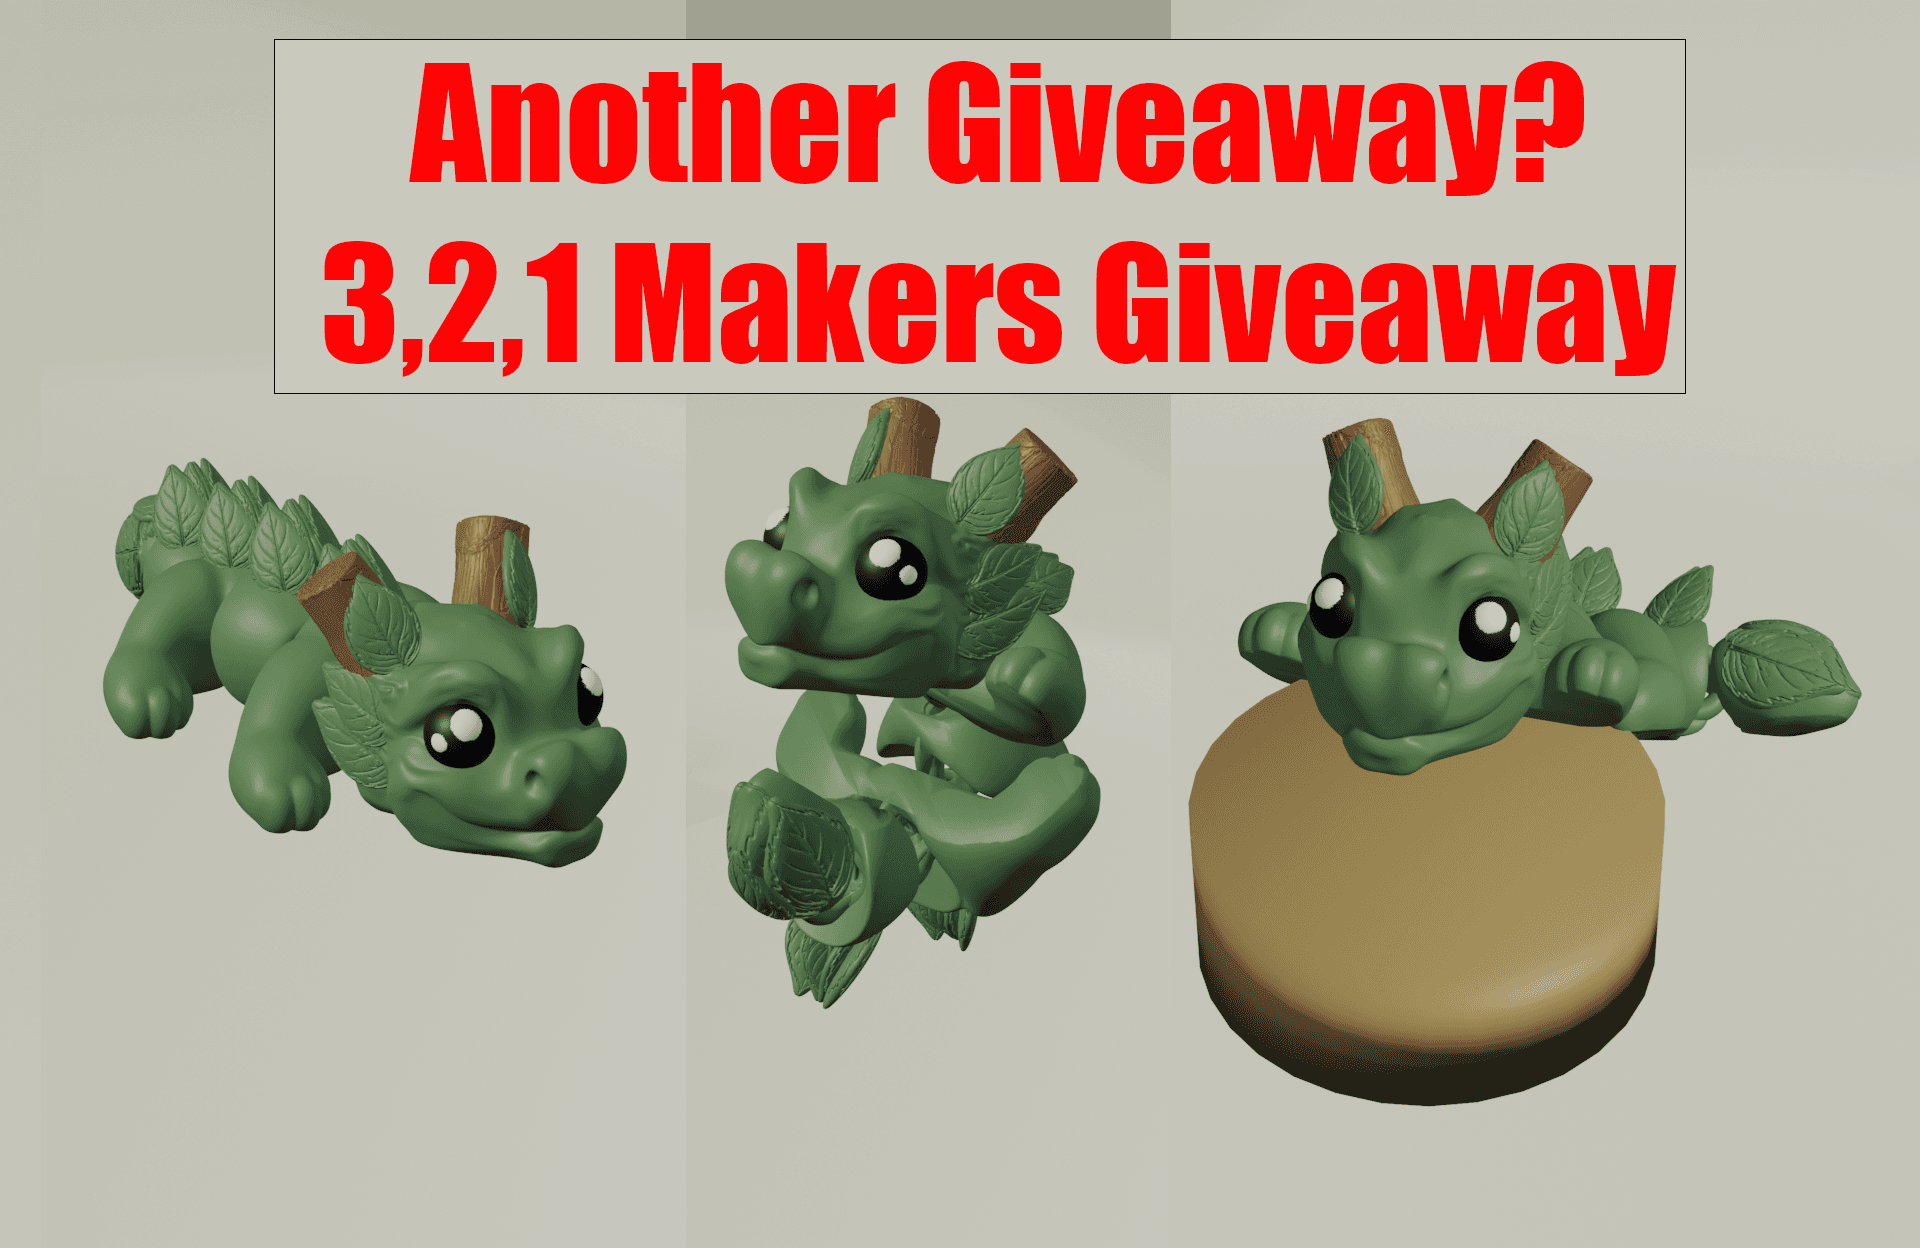 3,2,1 Makers Giveaway